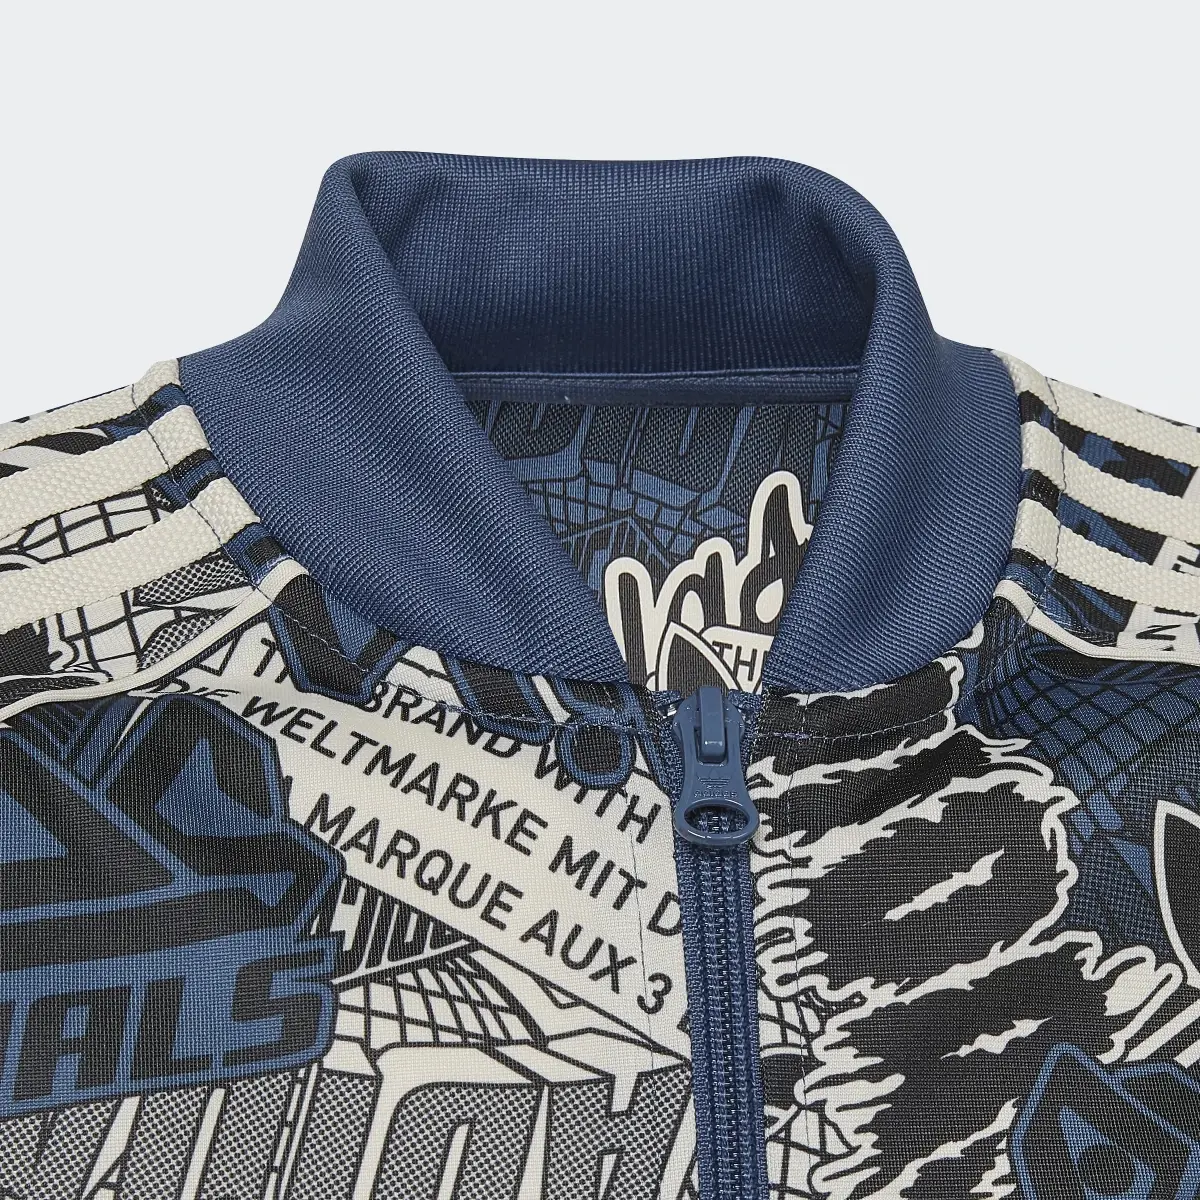 Adidas Allover Print SST Track Top. 3